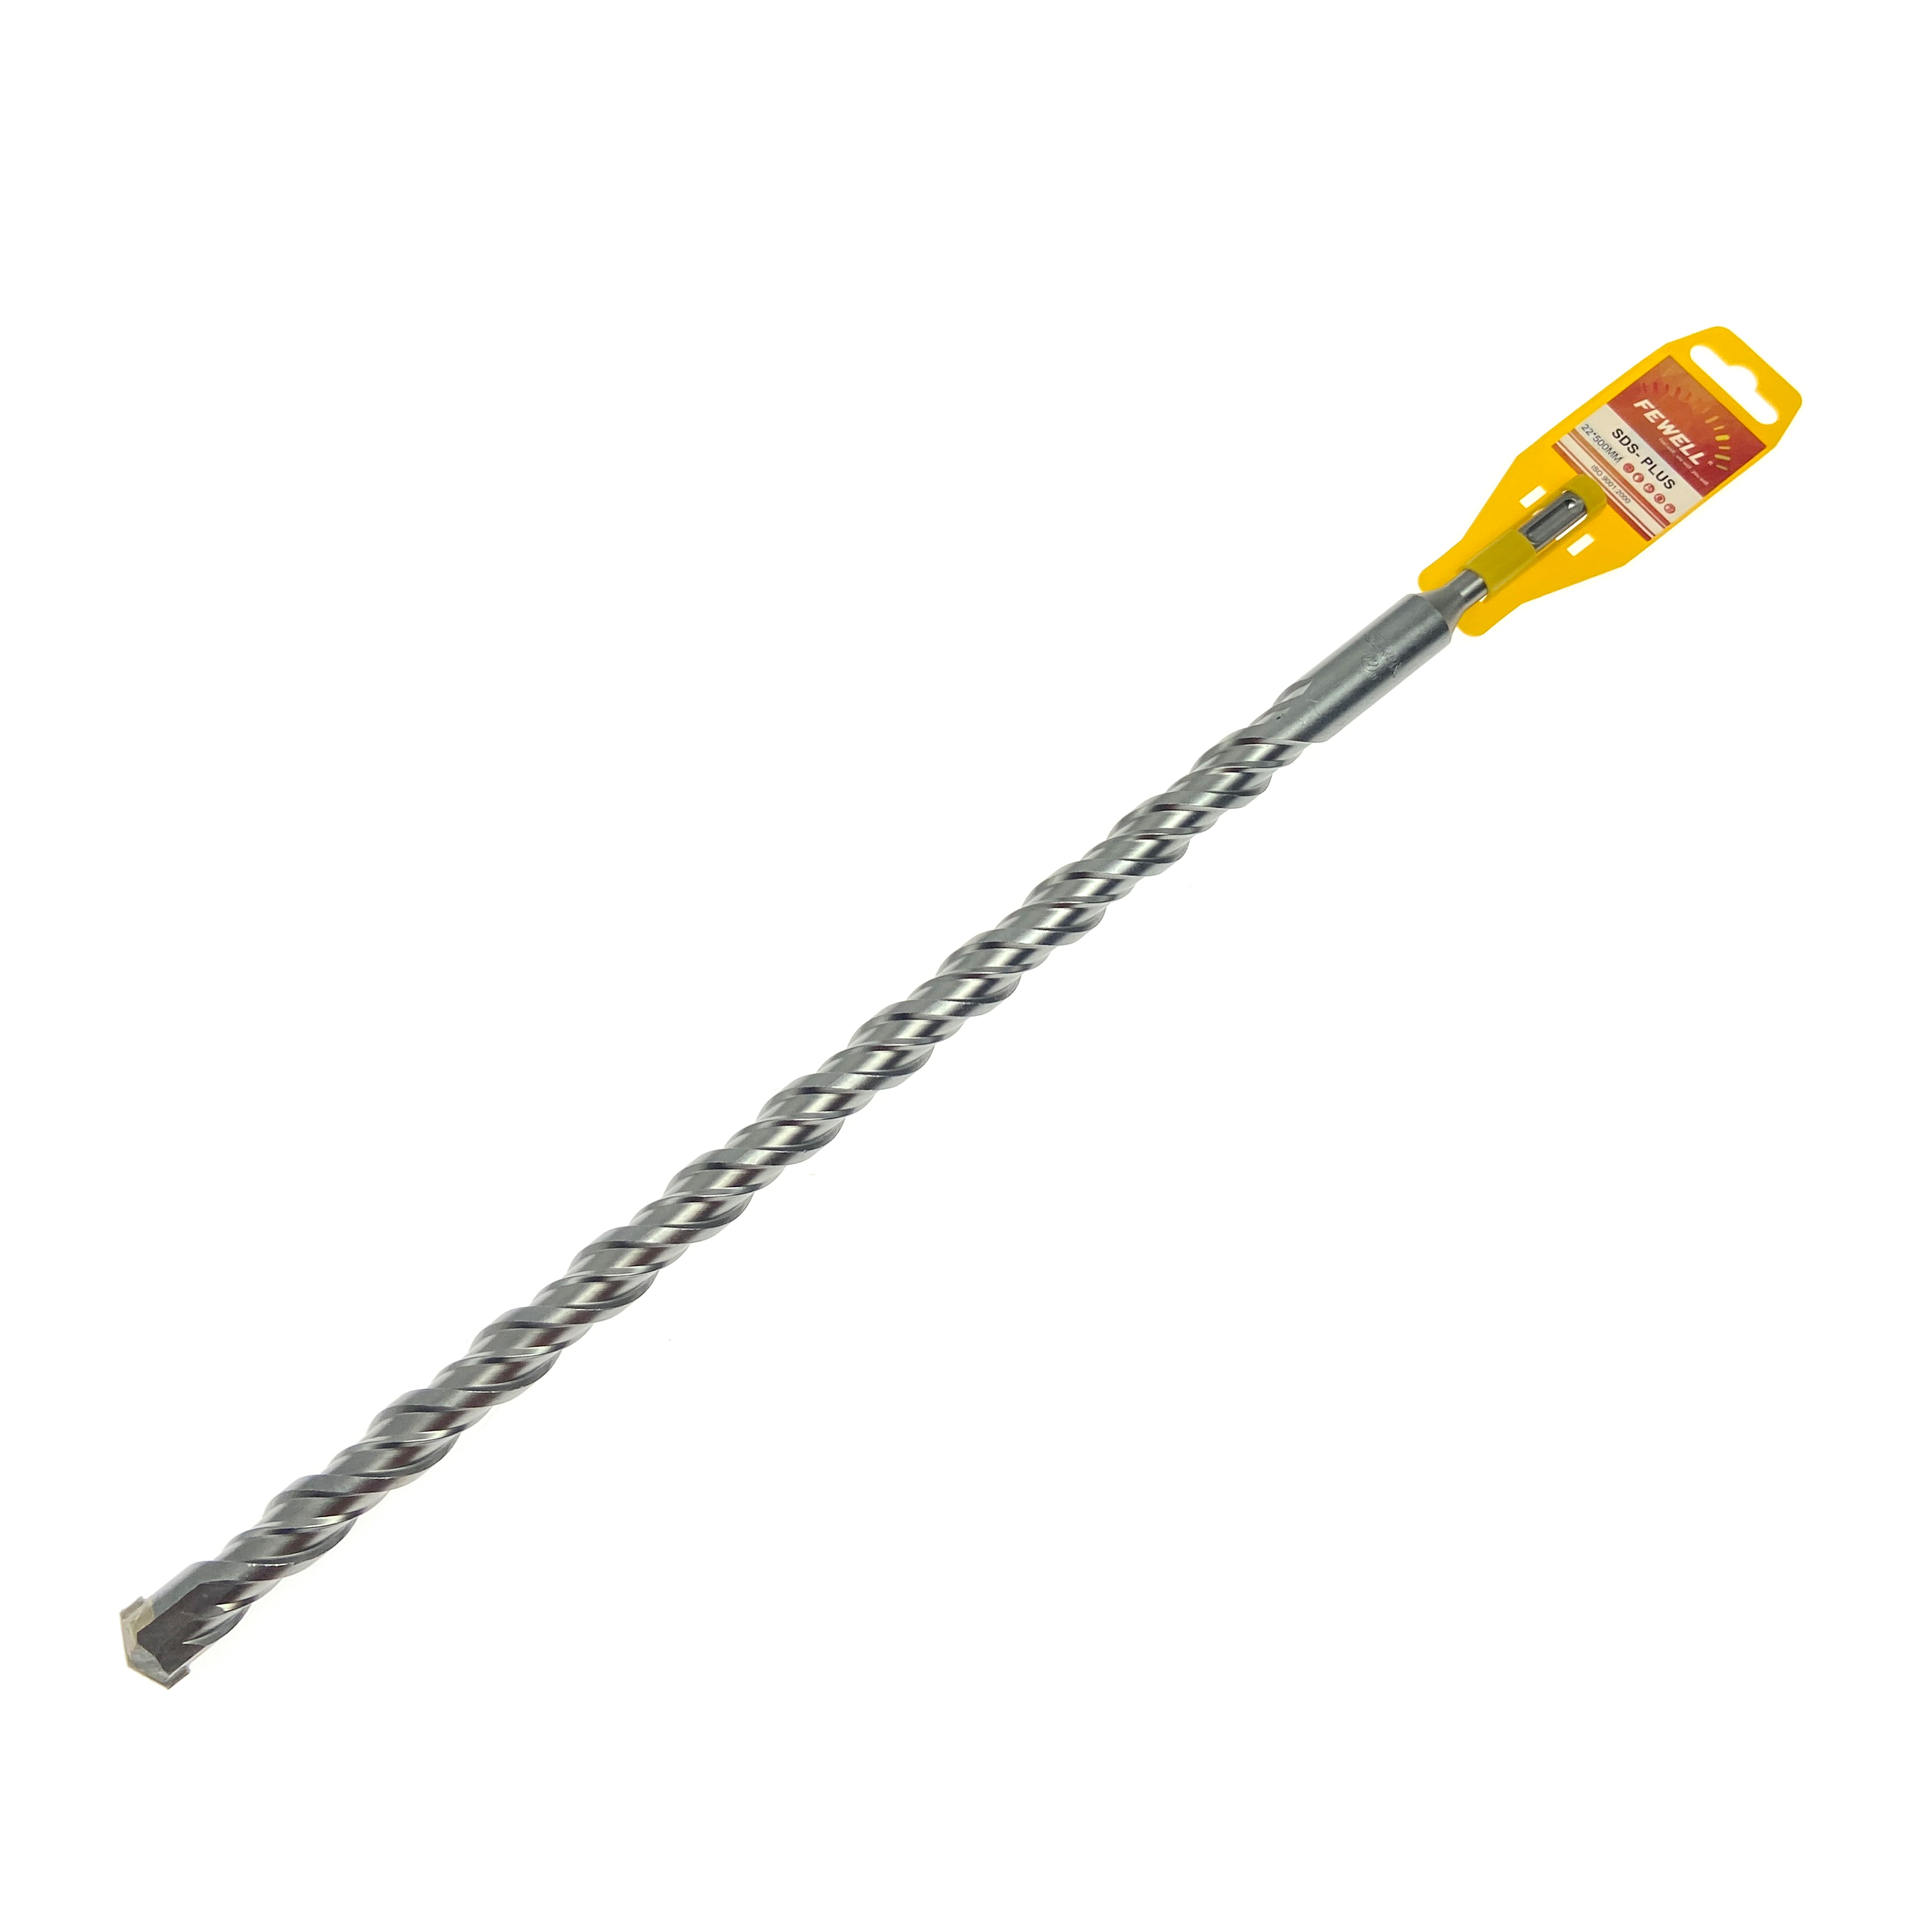 High quality SDS Plus Single Flat Tip 22*500/600/800/1000mm Double Flute Electric Hammer Drill Bit for Concrete wall Masonry Stone granite